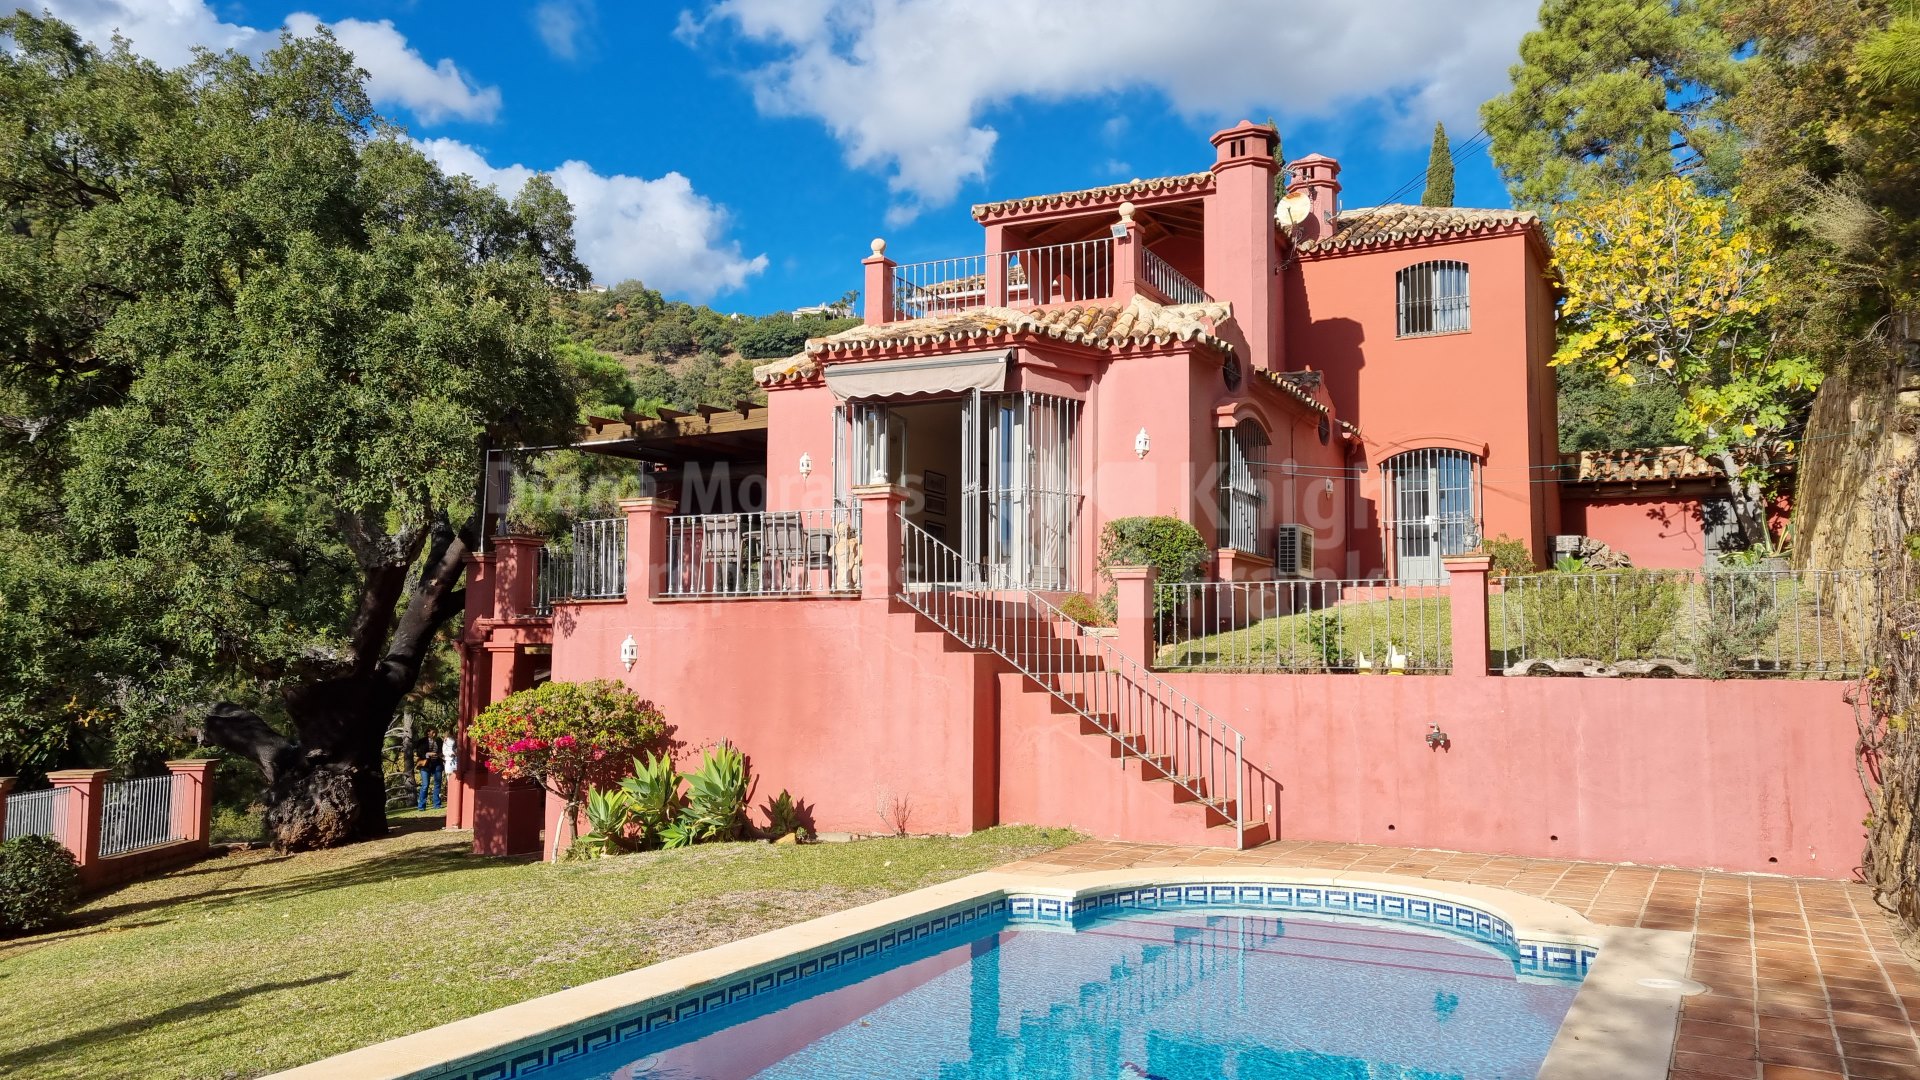 El Madroñal, Andalusian Style Villa in Gated Community